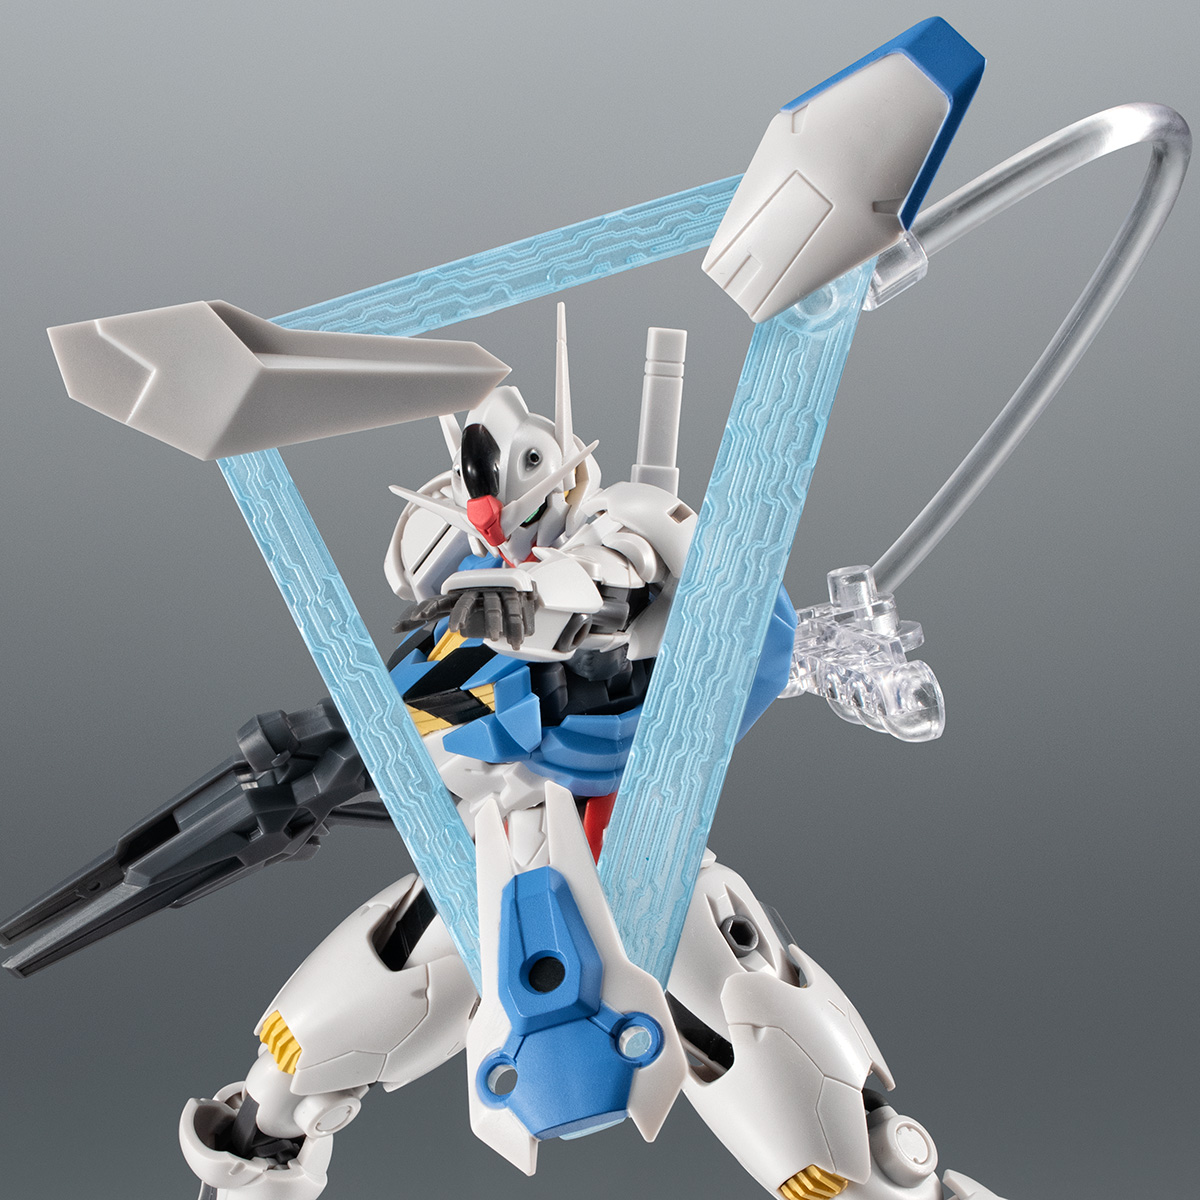 ROBOT SPIRITS <SIDE MS> EFFECT PARTS SET ver. A.N.I.M.E. ～MOBILE SUIT GUNDAM THE WITCH FROM MERCURY～